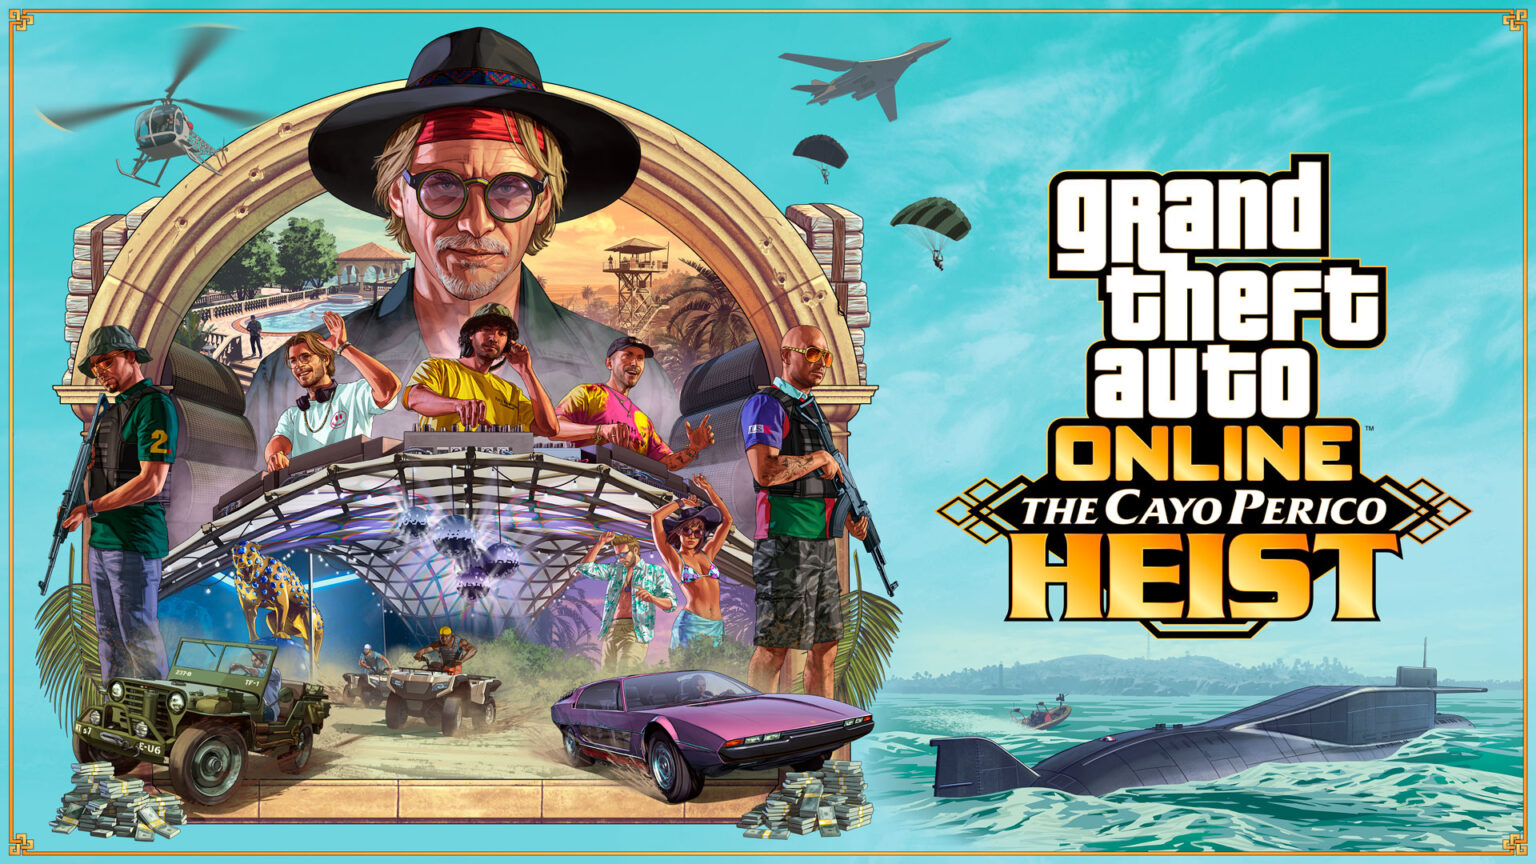 Grand Theft Auto: Online DLC, The Cayo Perico Heist Out Dec 15